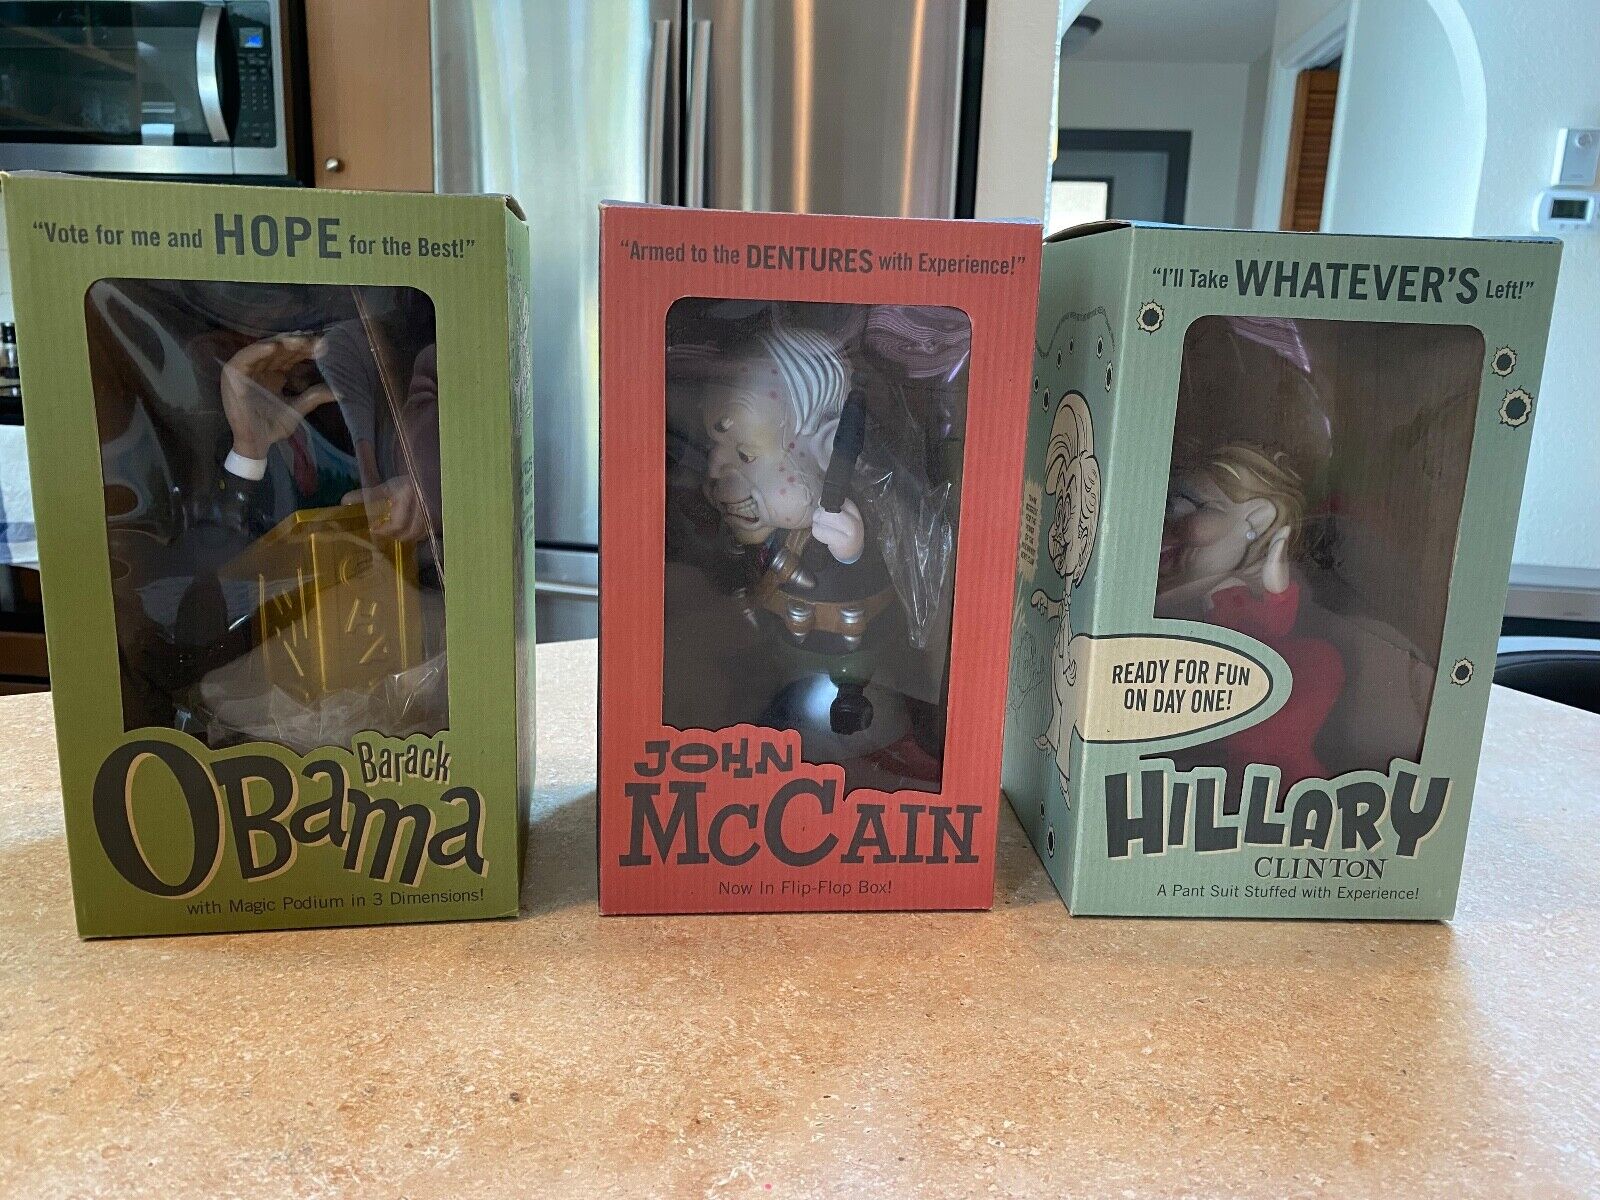 John K 2008 Political Candidate Toys Obama, McCain & Hillary, ALL 3 NEW IN BOX